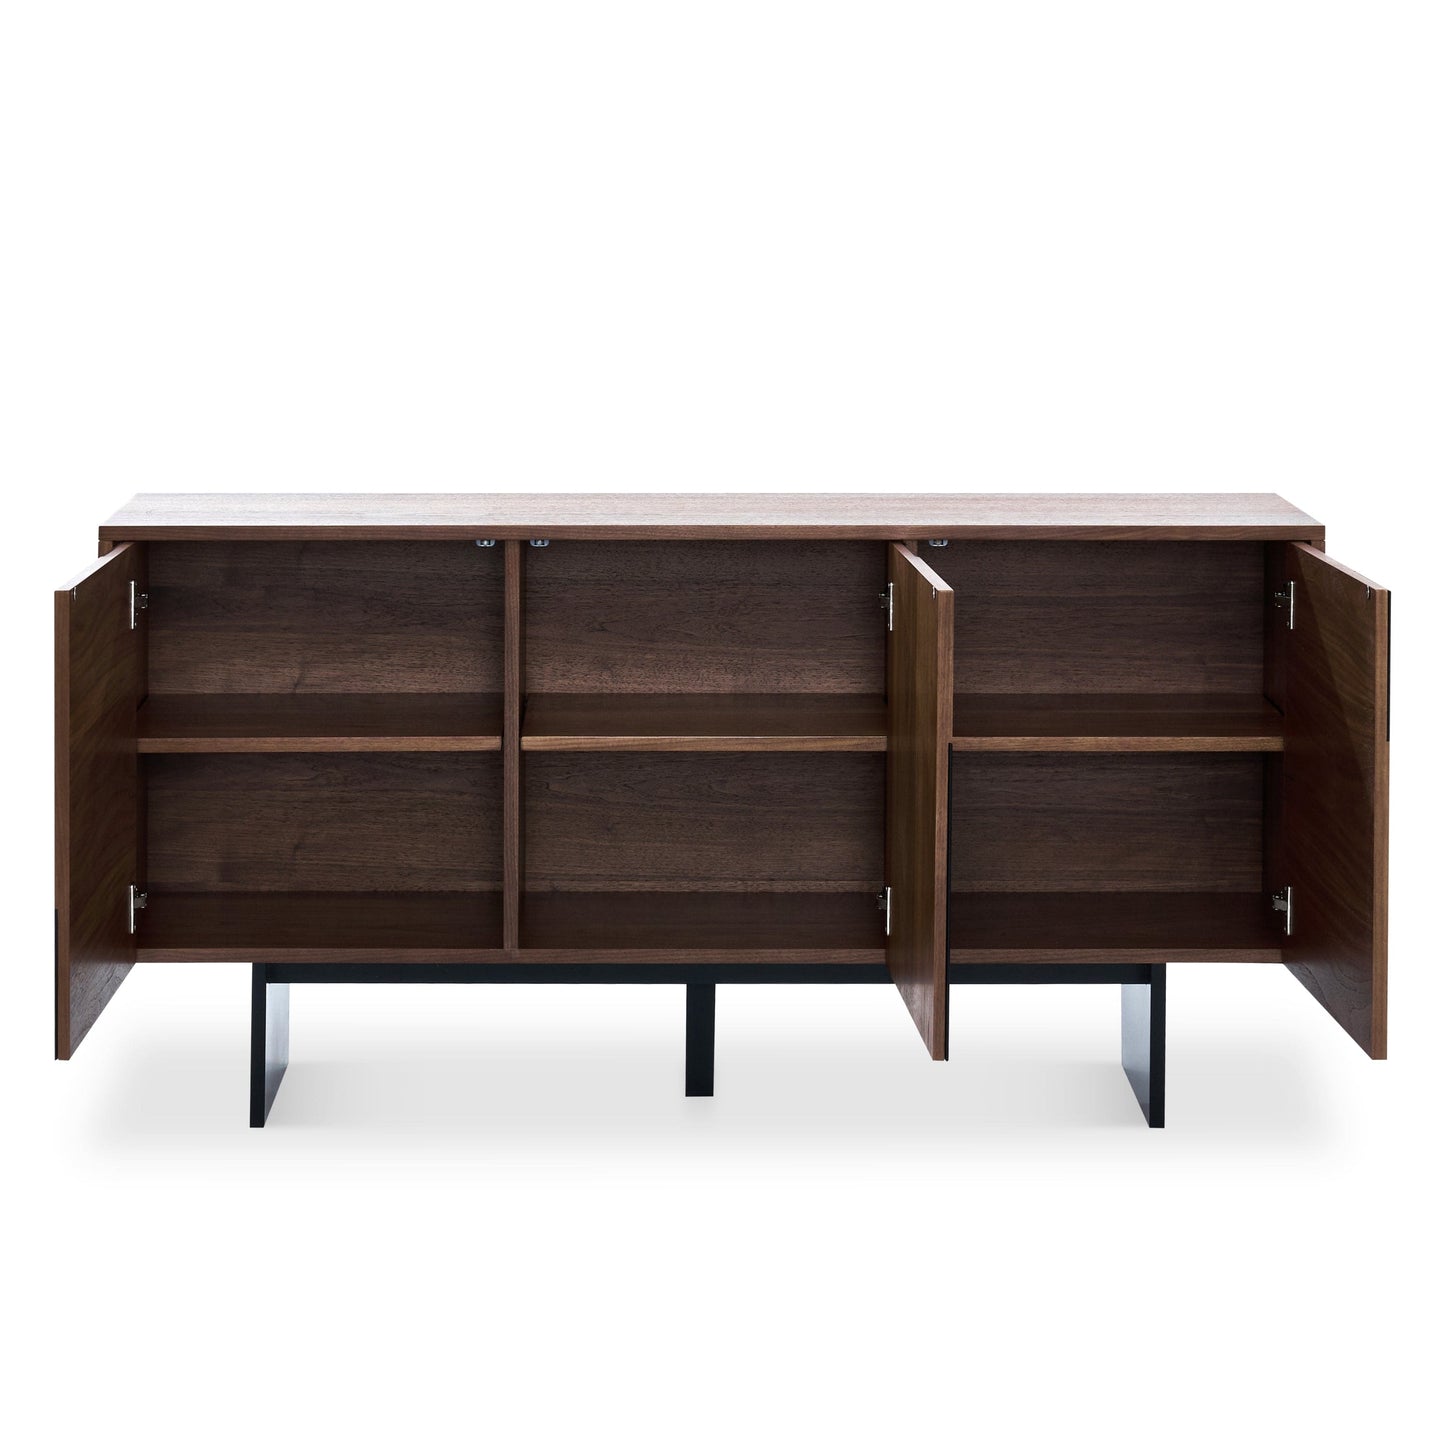 1st Choice Furniture Direct Cabinet Server 1st Choice Two Tone Long Sideboard Buffet Veneer Cabinet in Walnut